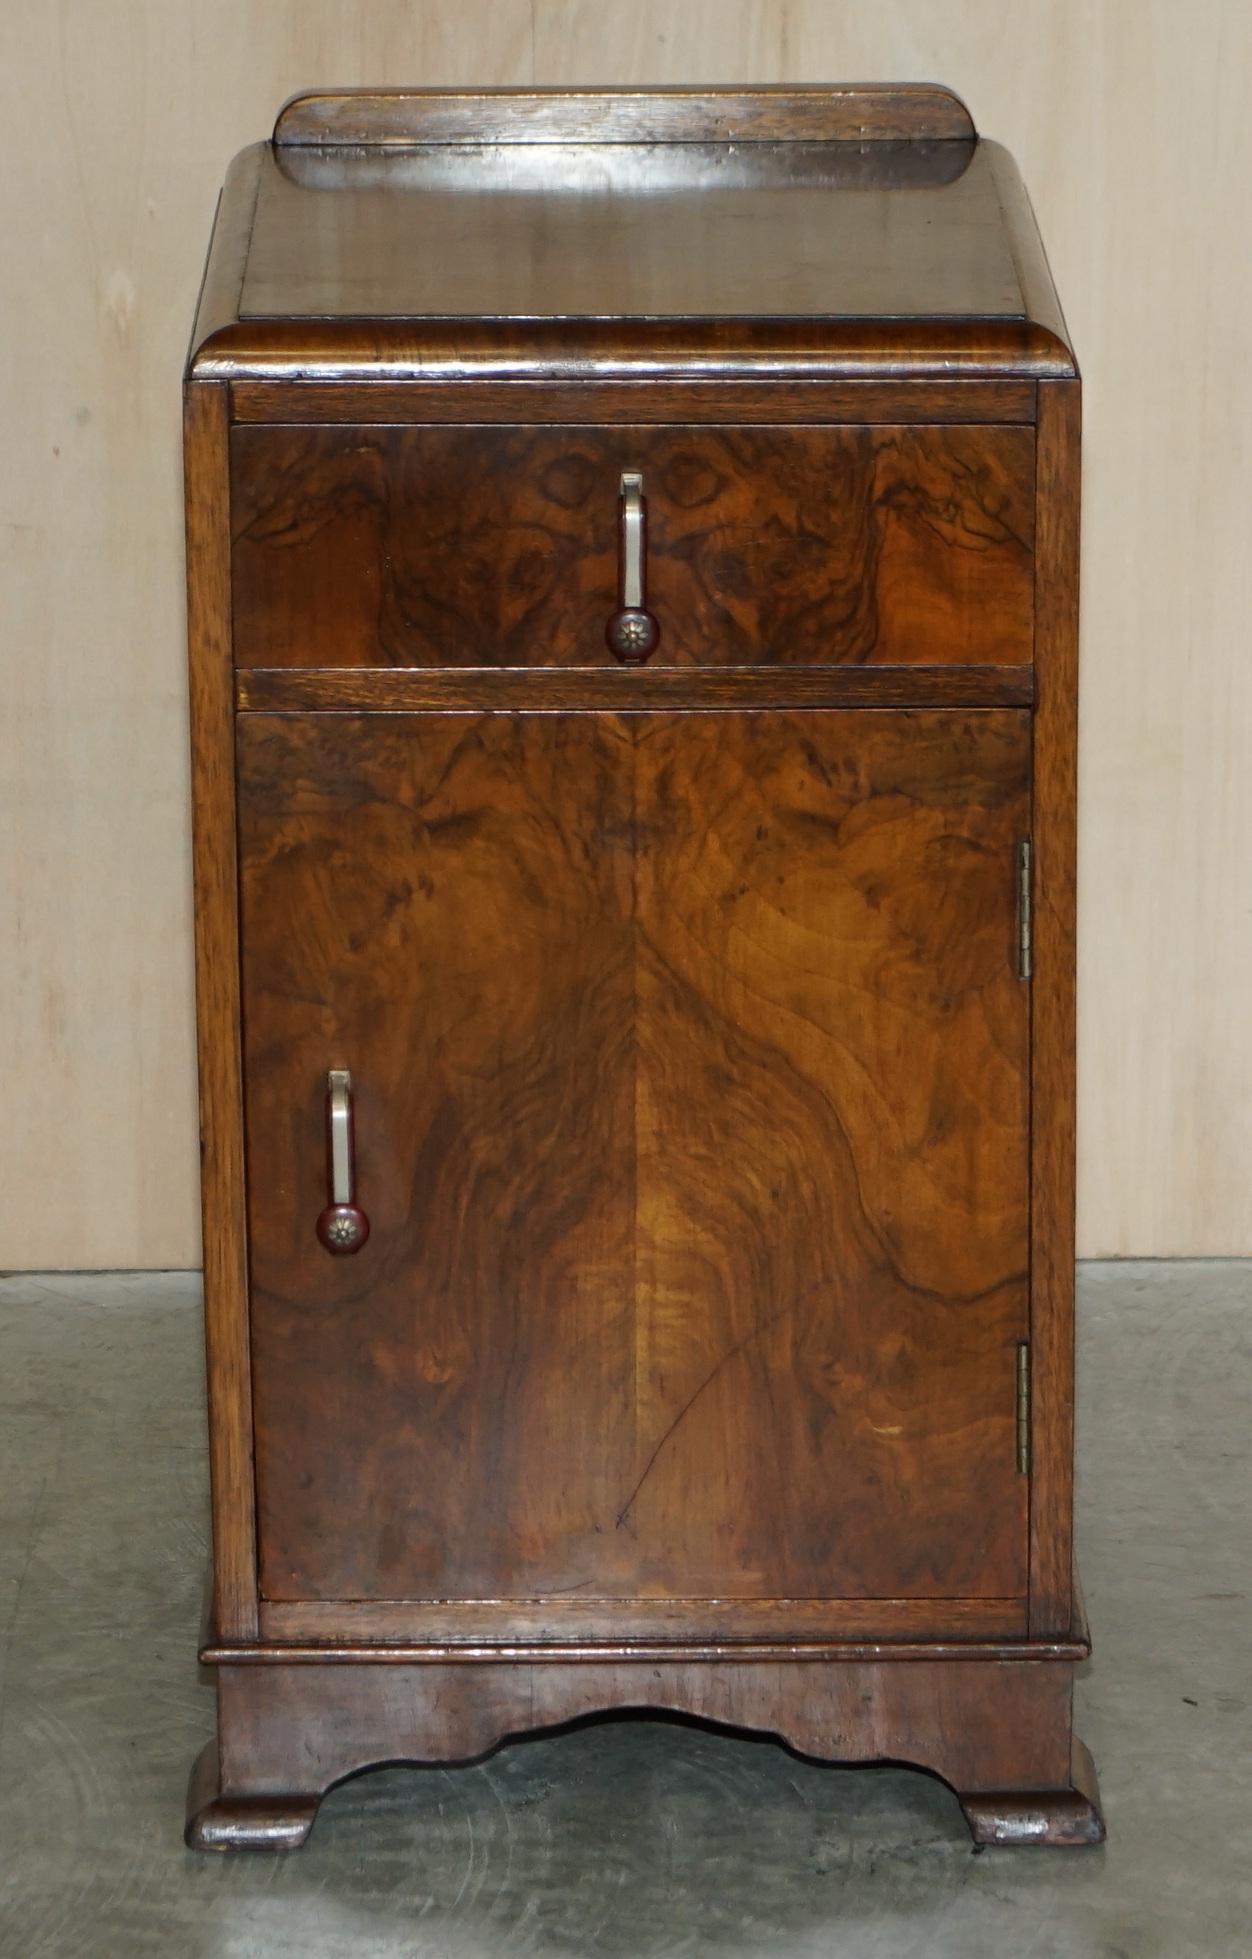 We are delighted to offer this stunning, original circa 1920’s Art Deco bedside table which is part of a suite

As mentioned this piece is part of a suite, in total I have a his and hers pair of wardrobes, the dressing table, one single side table